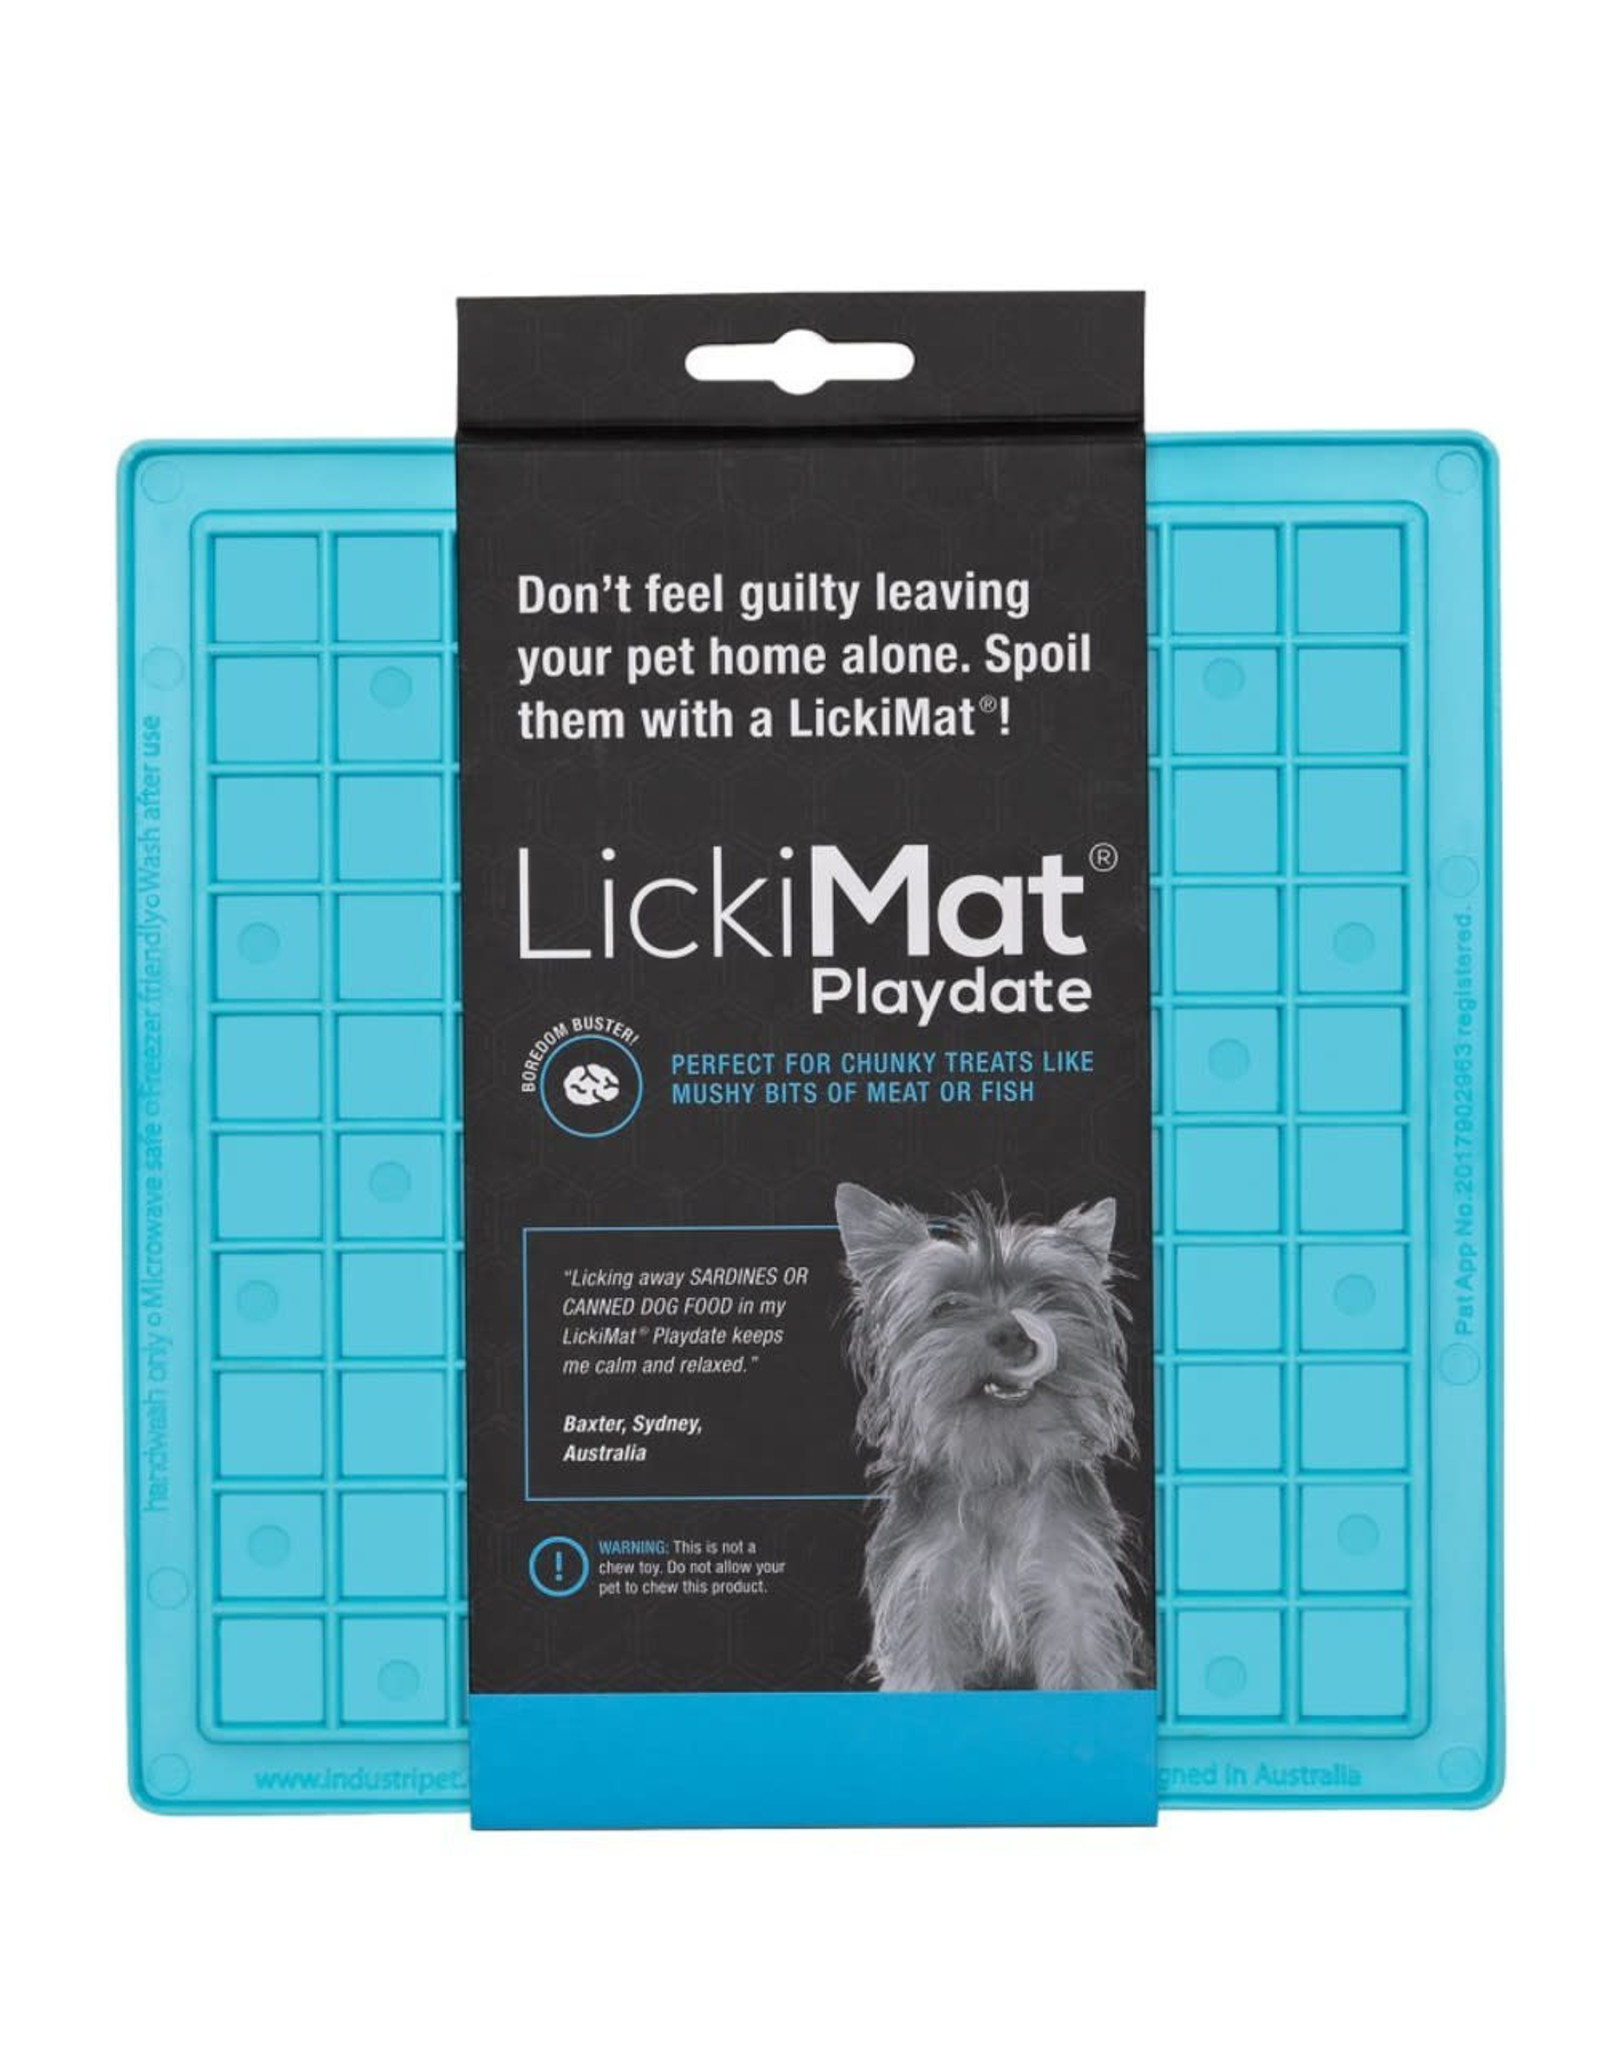 Boredom Busters Licking Mat Relax Green